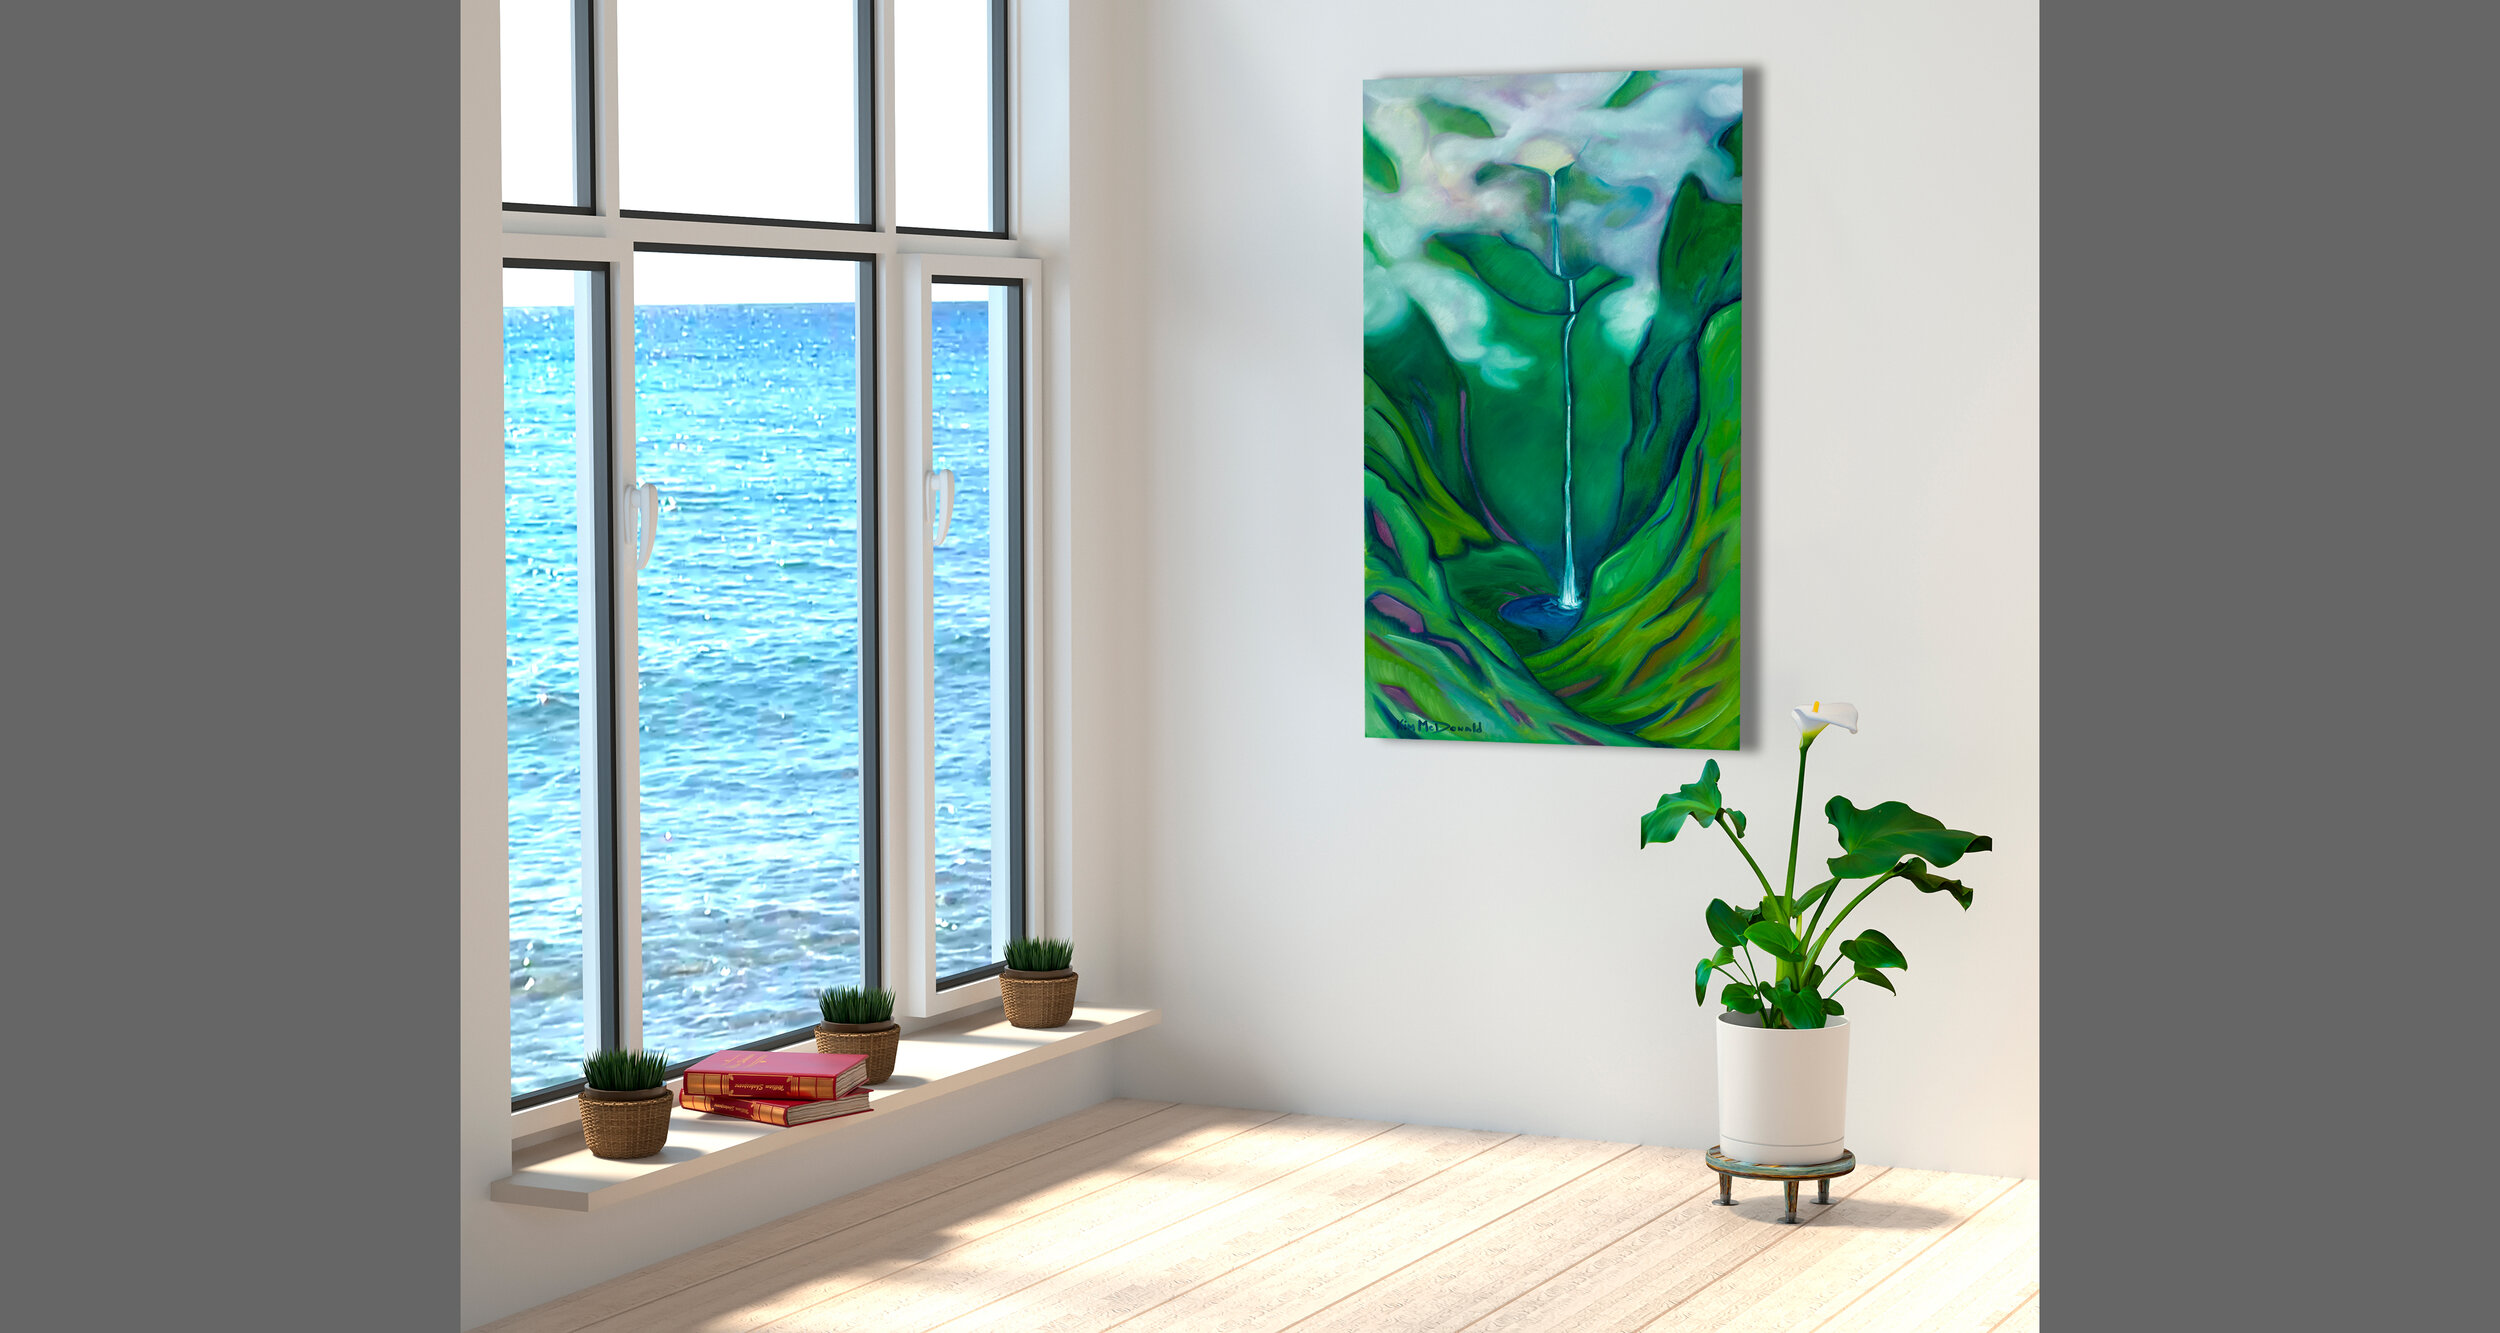  Maui inspired painting by artist Kim McDonald on an indoor wall 